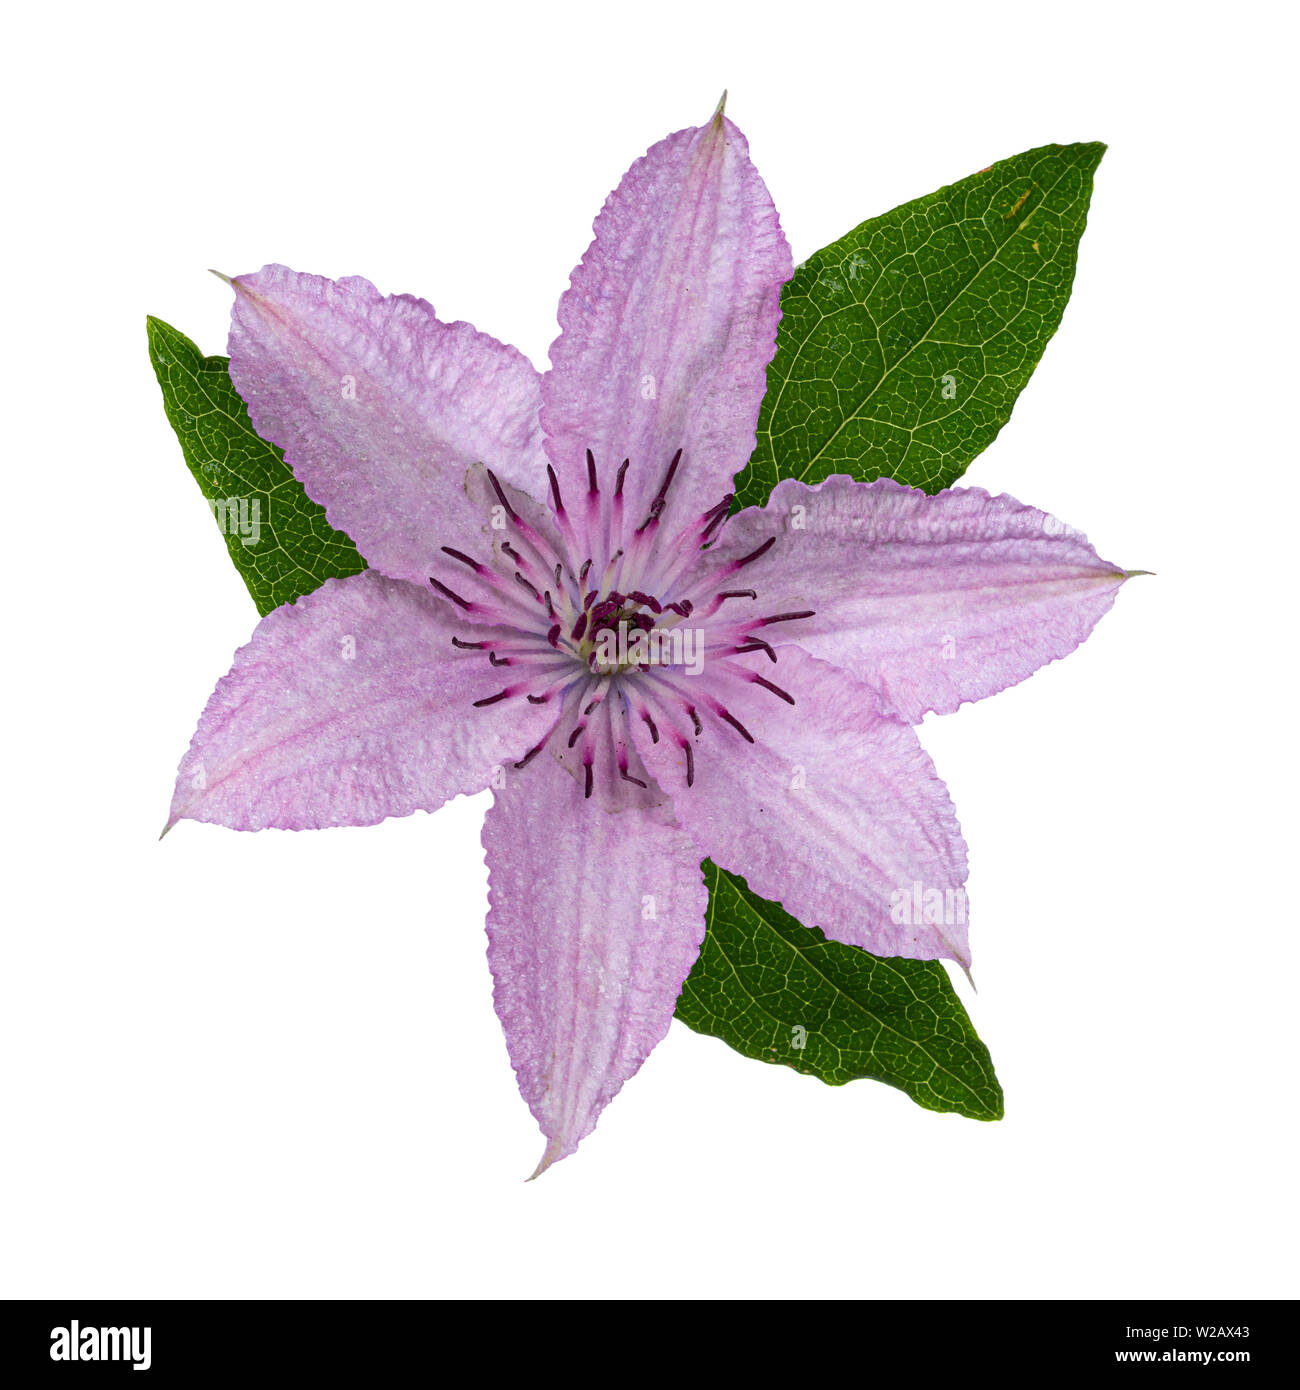 Top view of single blooming Clematis Hagley Hybrid flower with leafs. Isolated on white background. Stock Photo